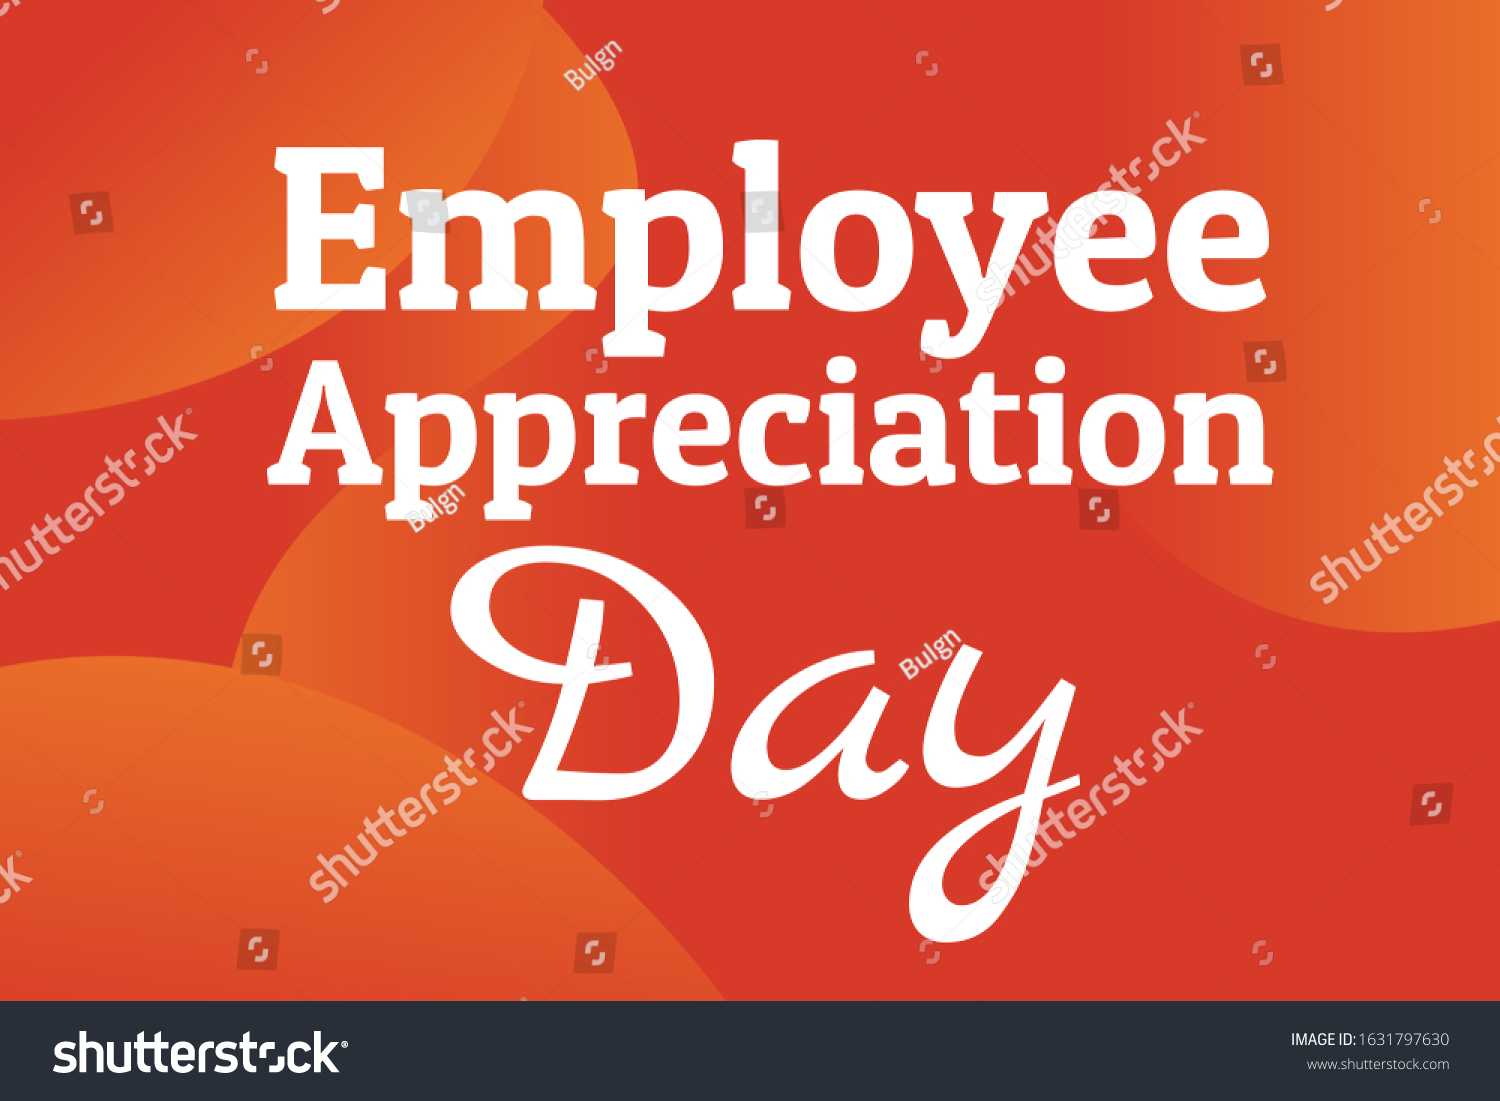 Employee Recognition Cards Template from image.shutterstock.com